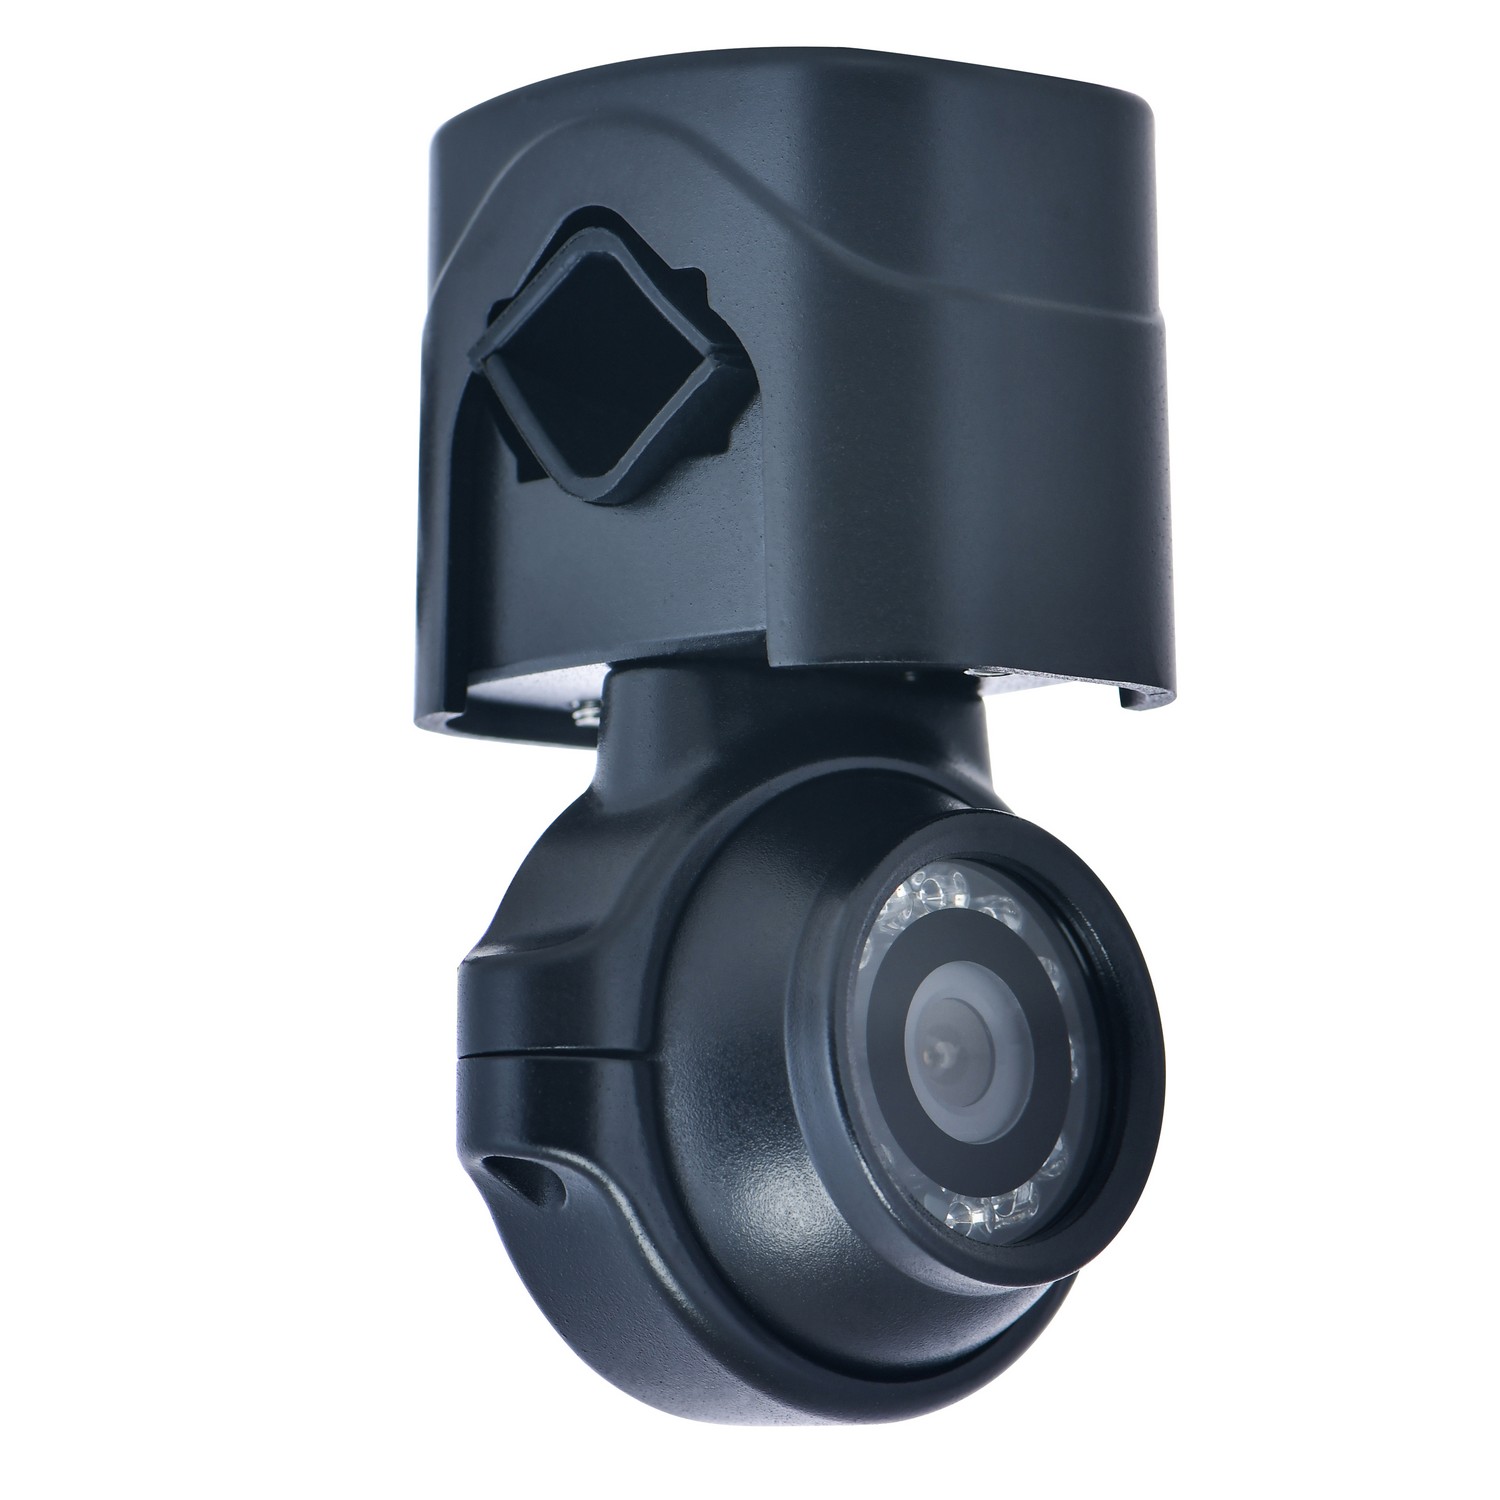 IP69 waterproof car camera with wdr + full hd resolution